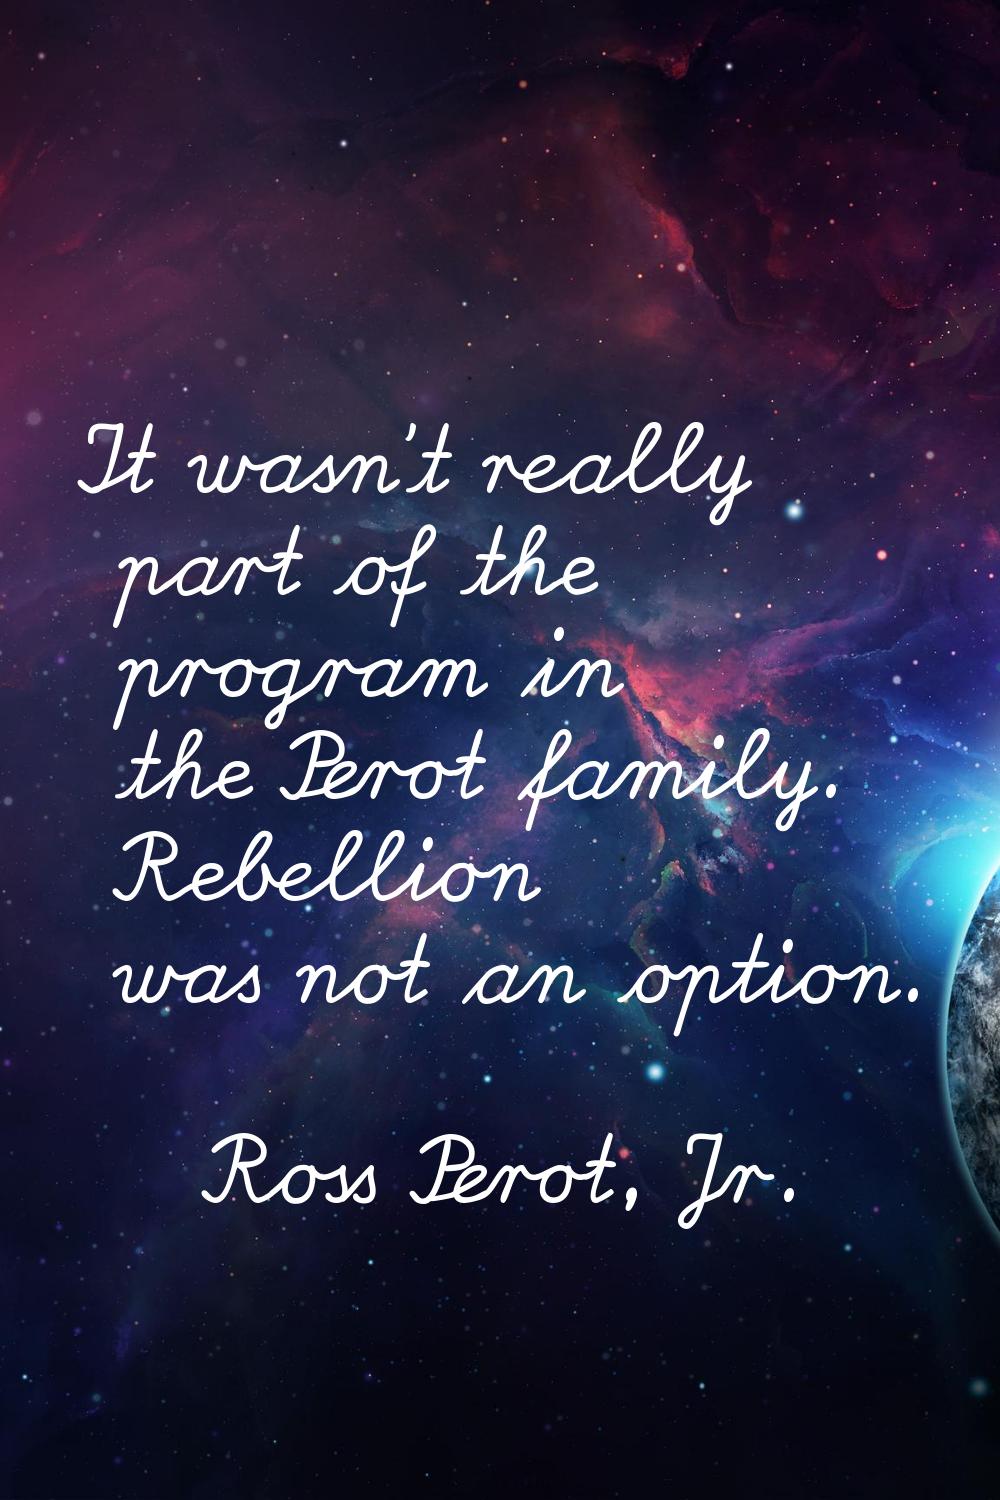 It wasn't really part of the program in the Perot family. Rebellion was not an option.